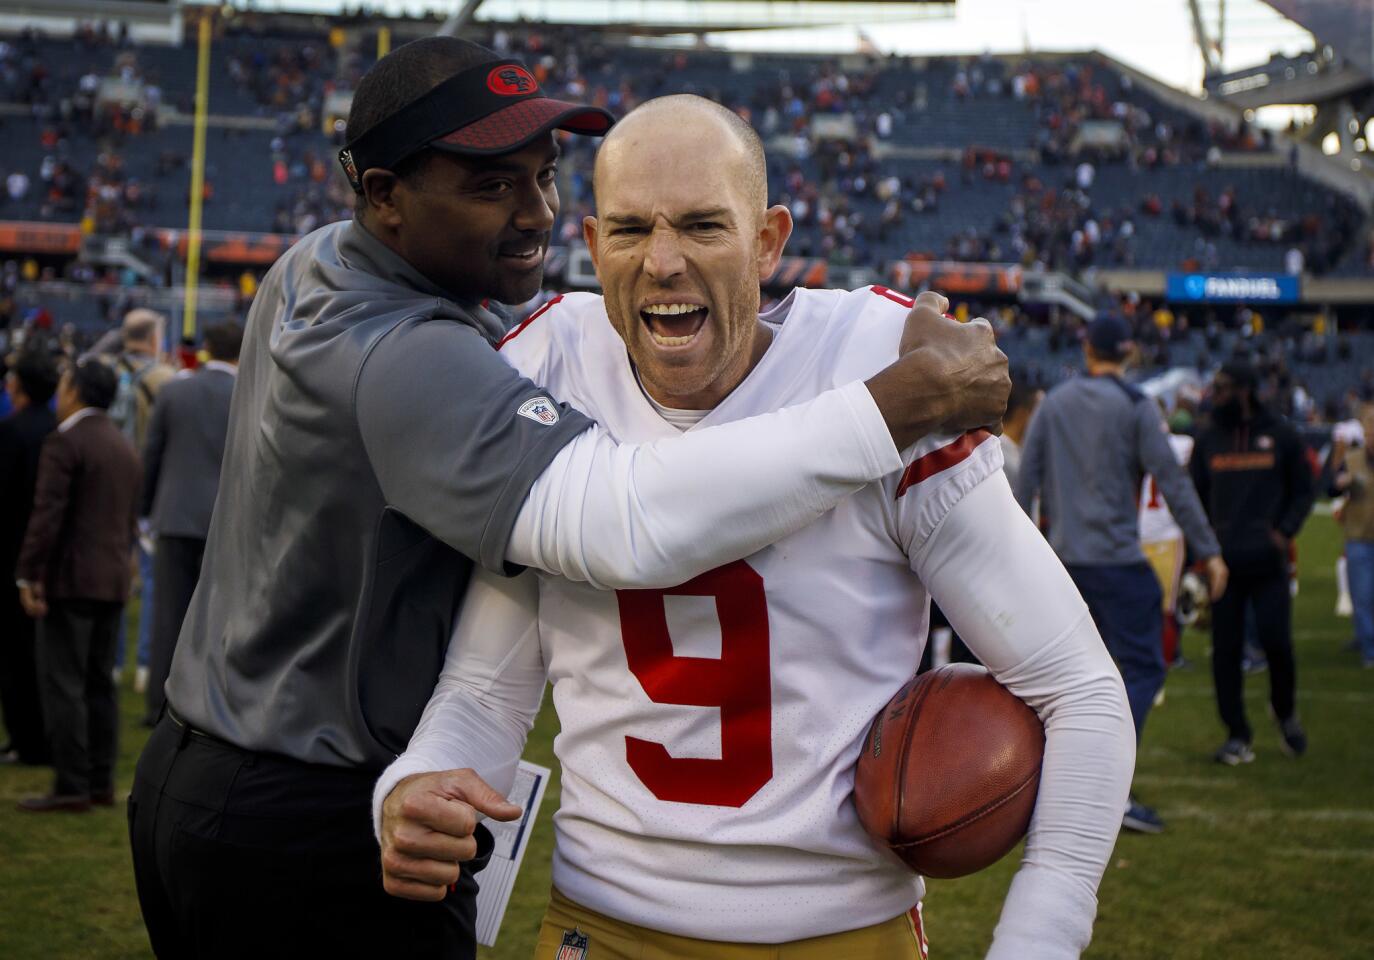 49ers kicker Robbie Gould (9) celebrates his game-winning field goal, his fifth of the day, to defeat his former team the Bears on Sunday, Dec. 3, 2017 at Soldier Field.